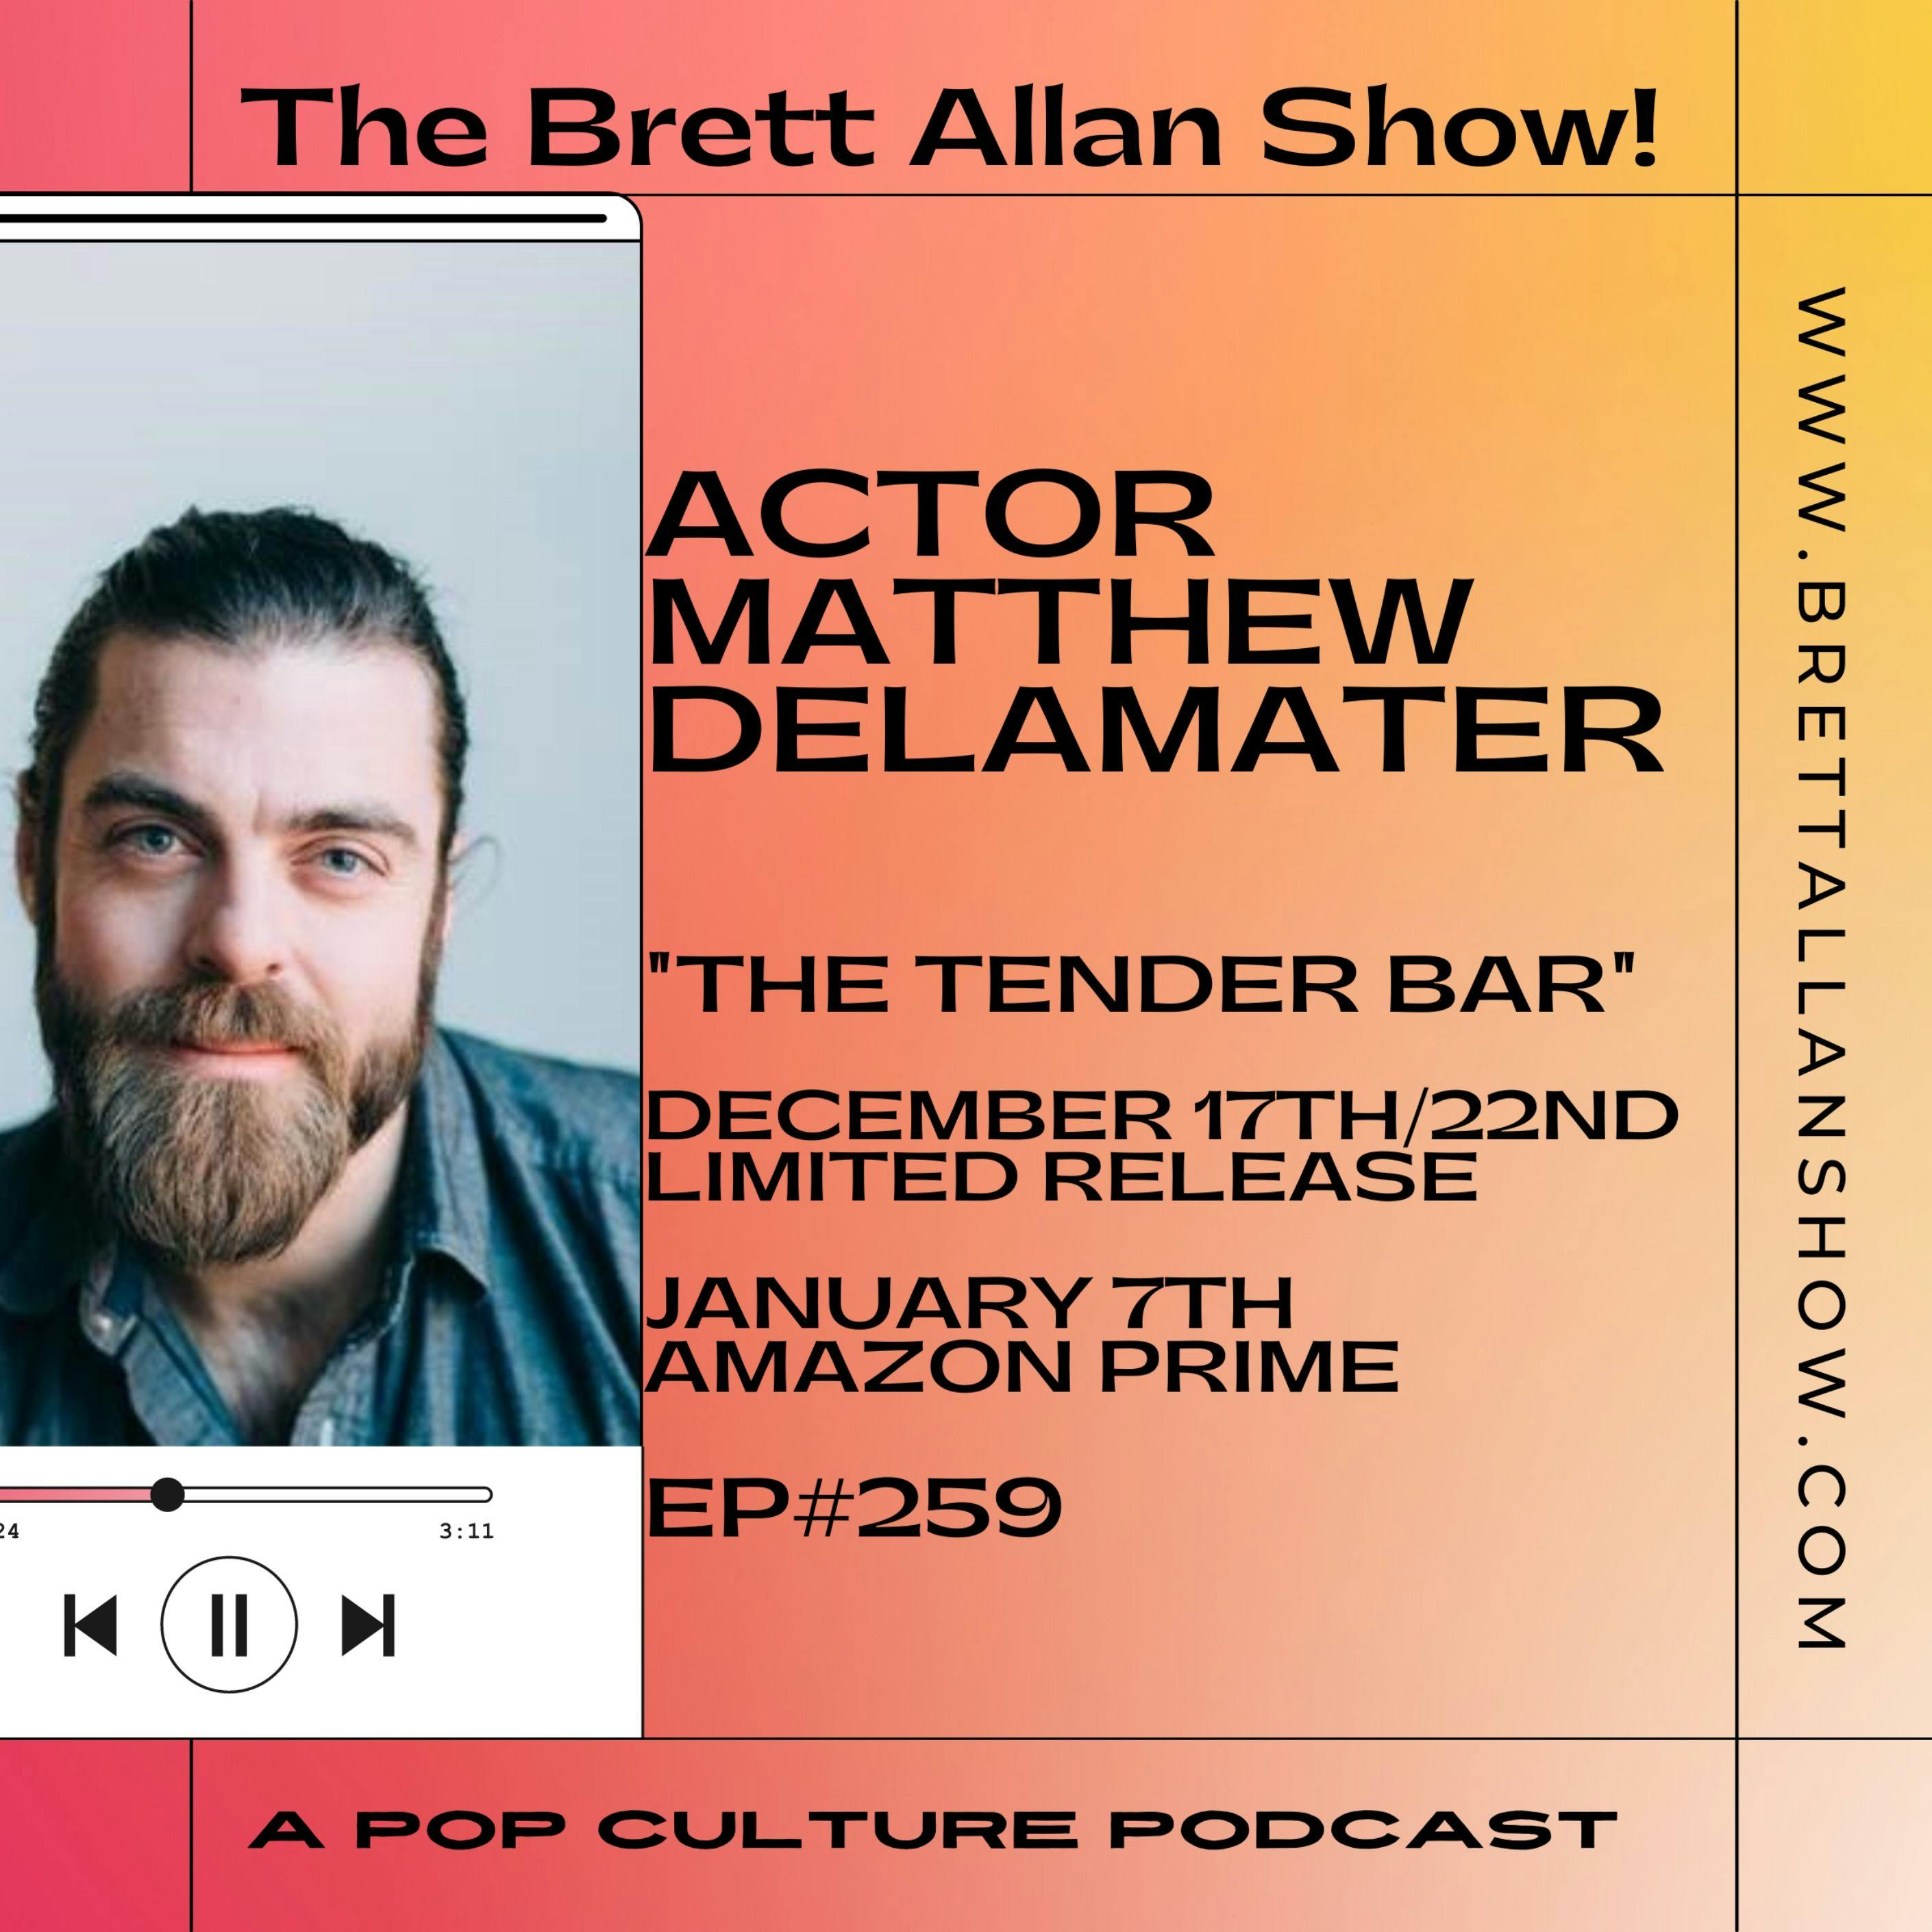 Actor Matthew Delemater Talks About His New Film "The Tinder Bar" | Available December 17th (Limited) and 22nd  (January 7th) Amazon Prime Image